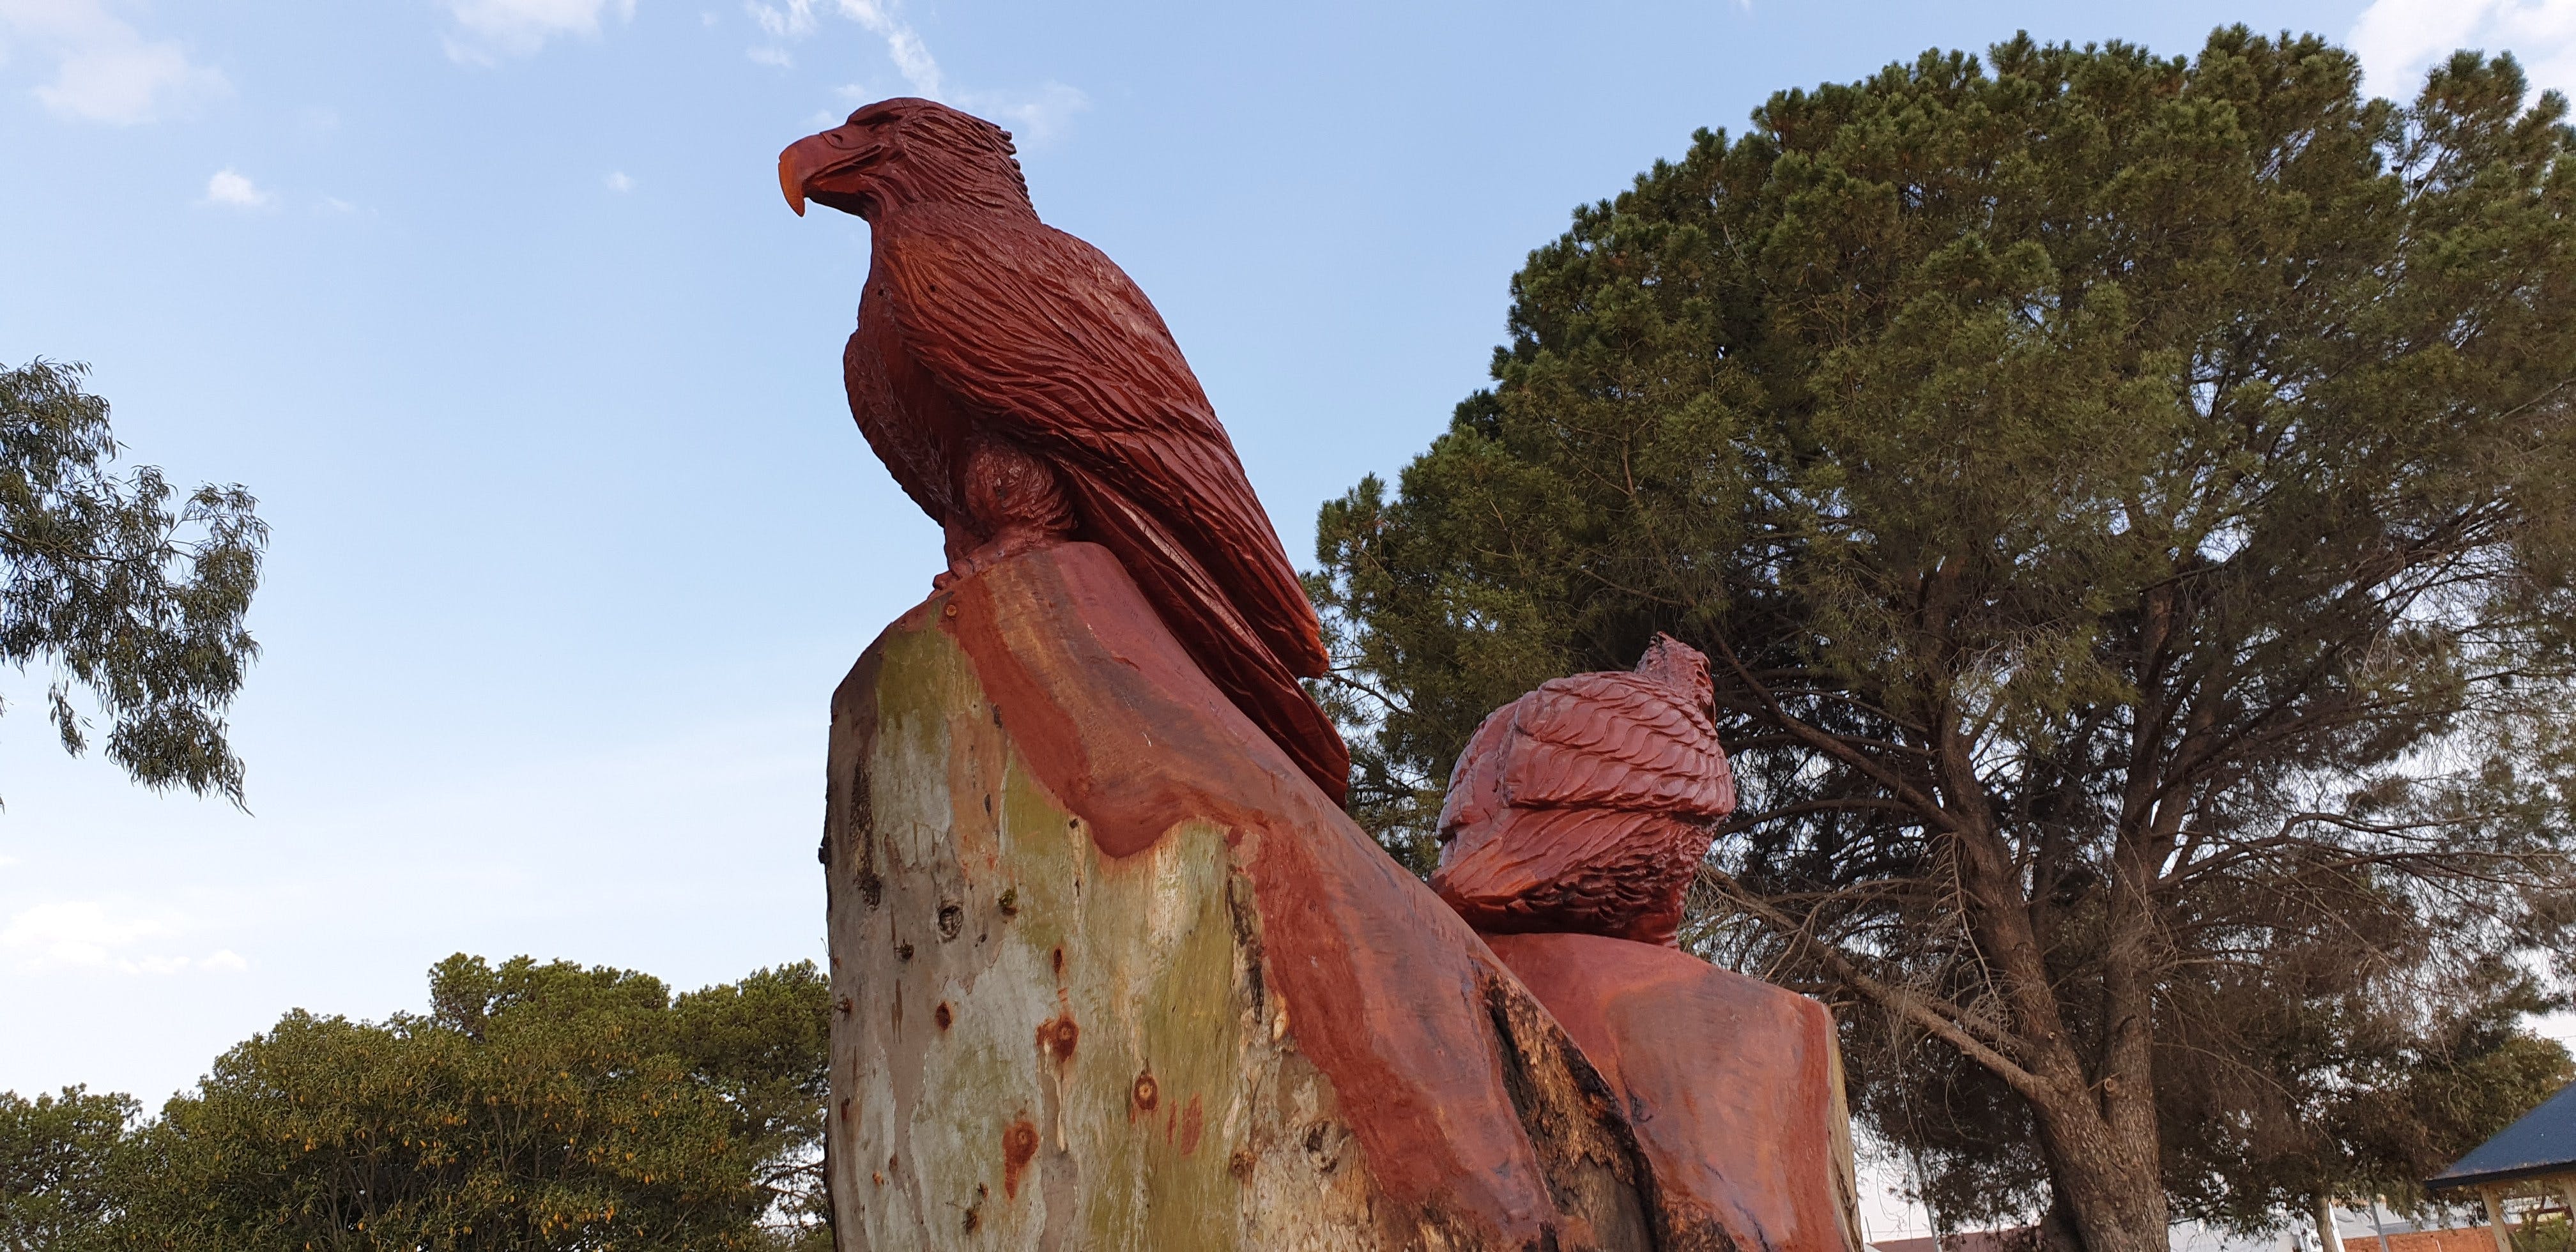 Chainsaw Tree Sculpture - Attractions Sydney